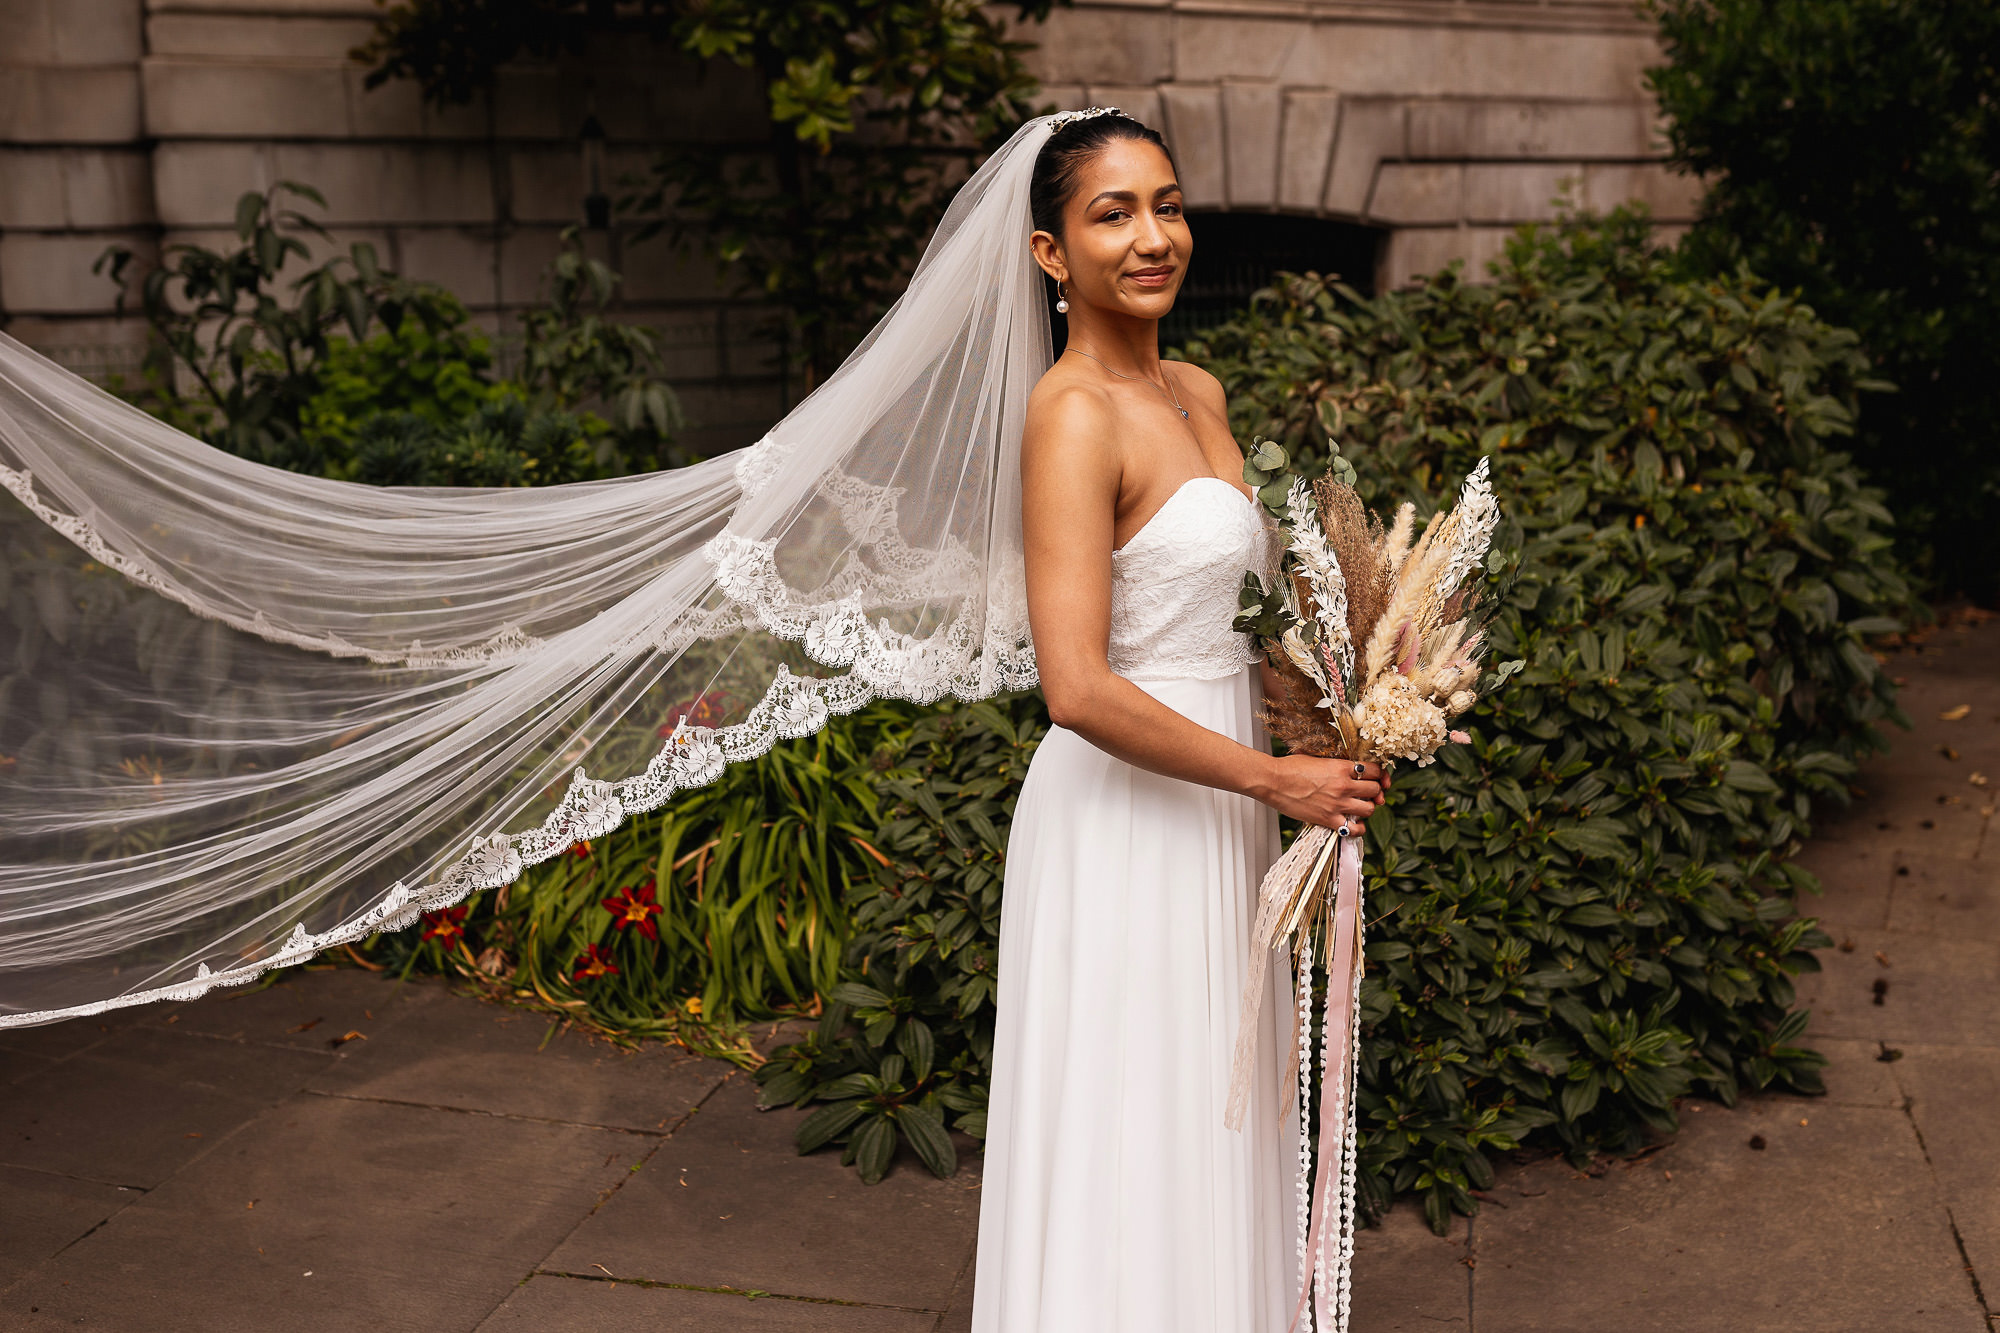 Multicultural wedding photographer, St Pauls Cathedral, London